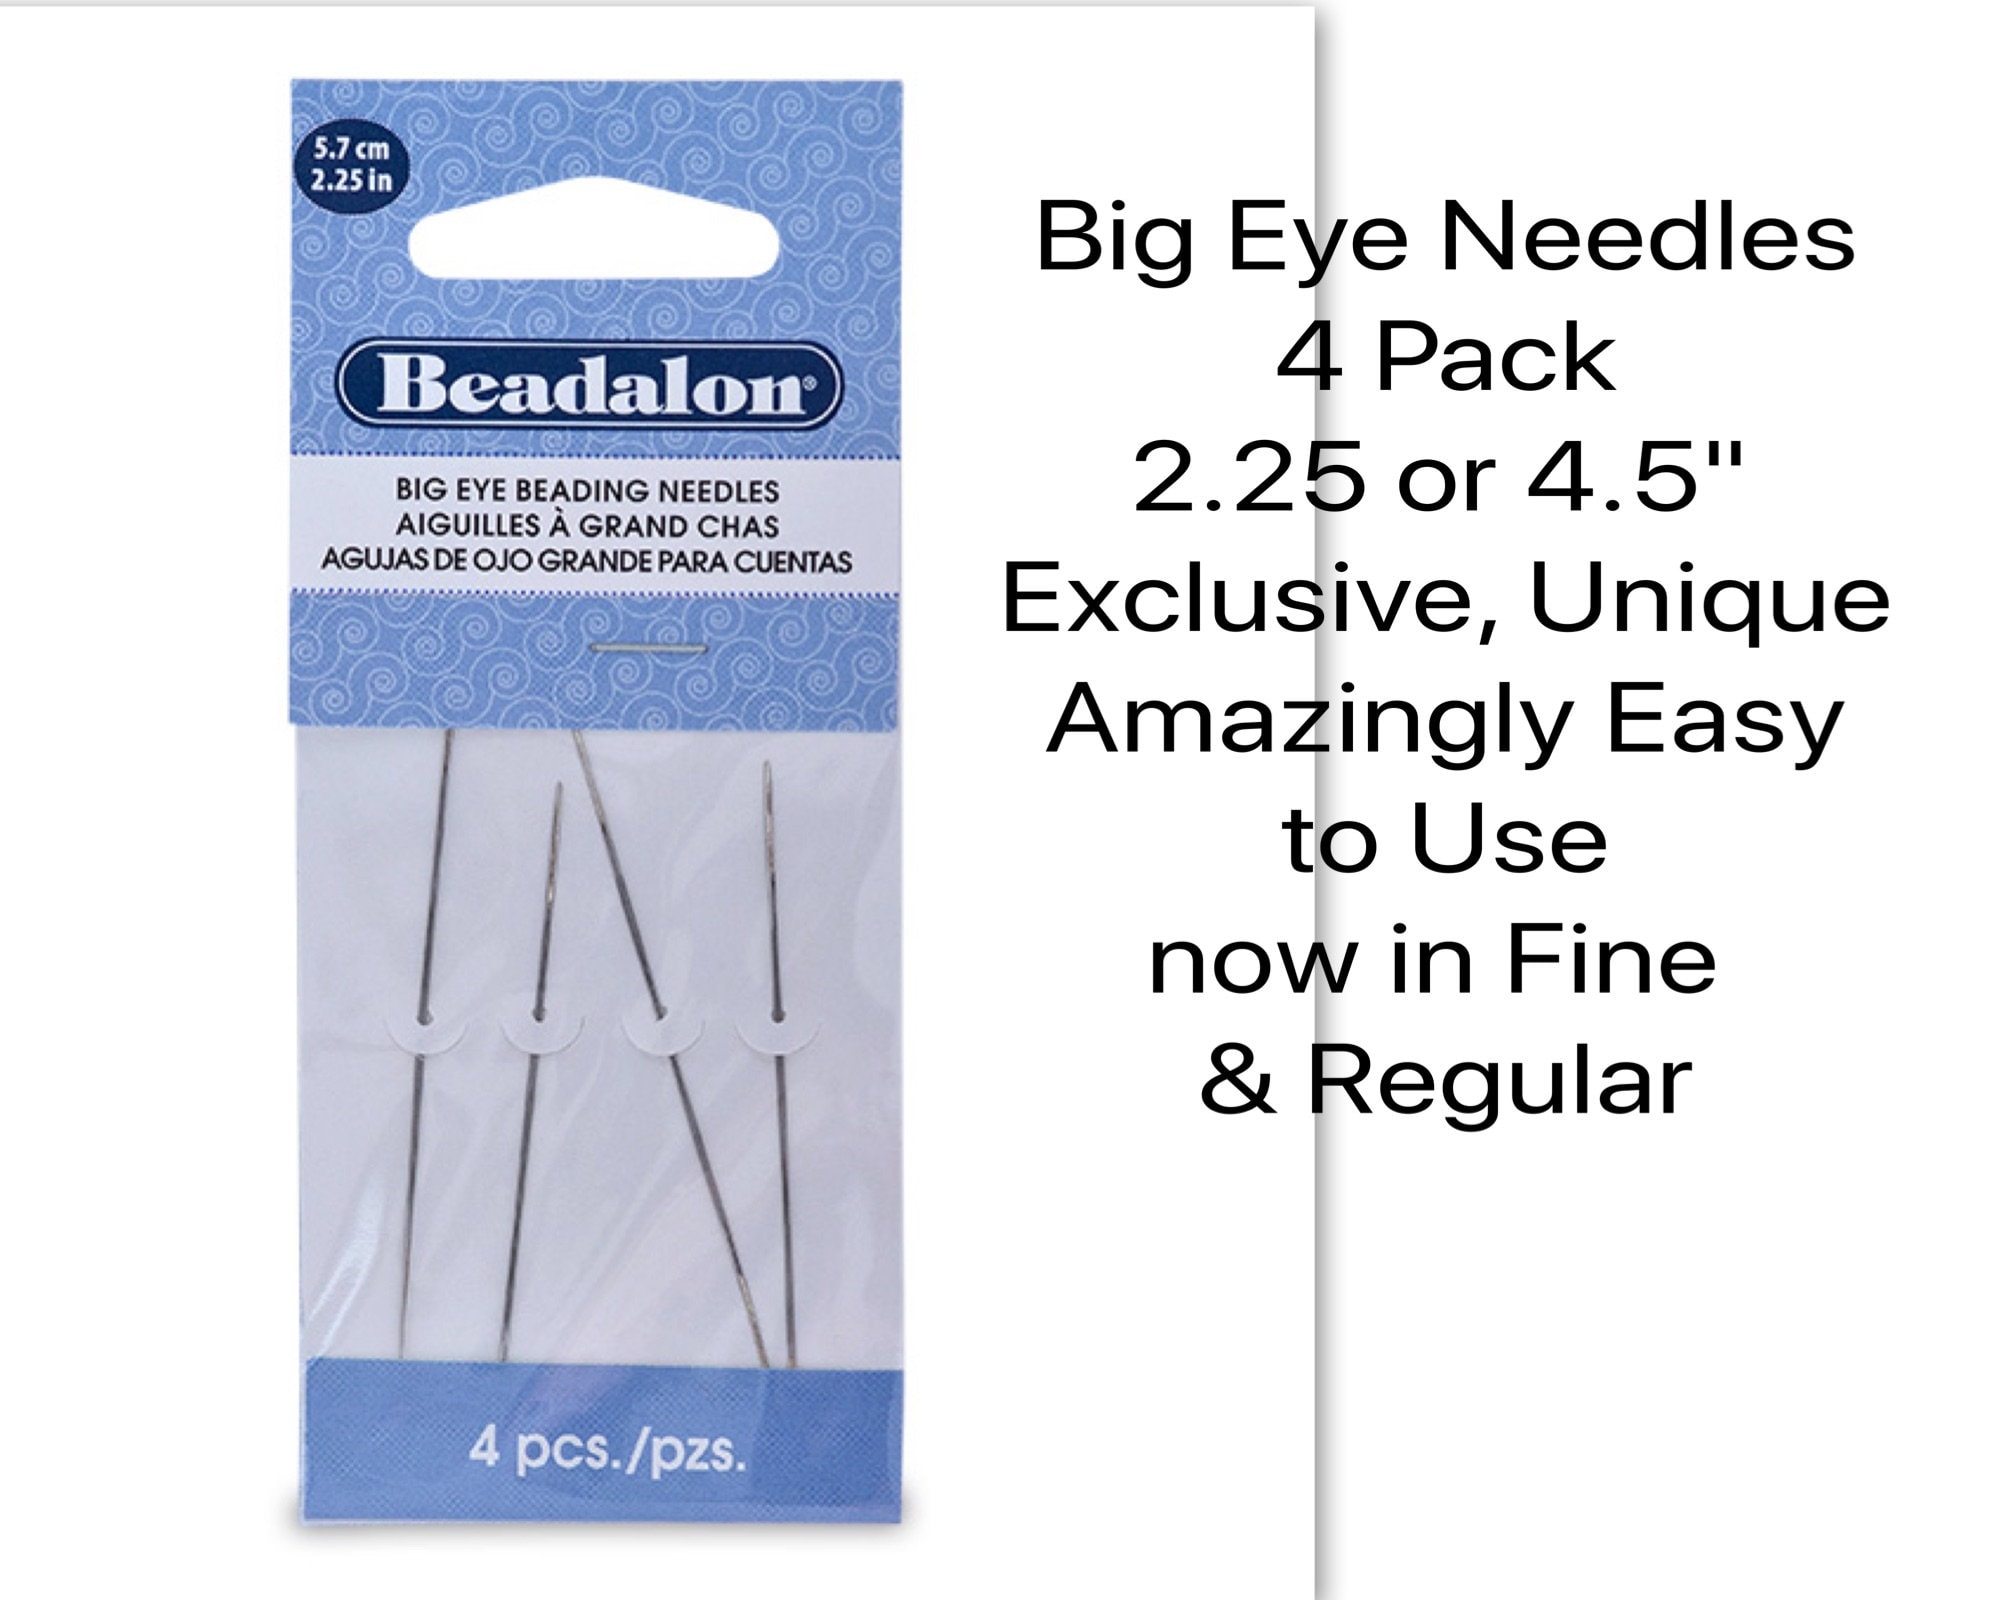 5.7cm 1 Needle for Jewelry Making Stainless Steel Color Stainless Steel Big Eye Beading Needles 2 1/4 